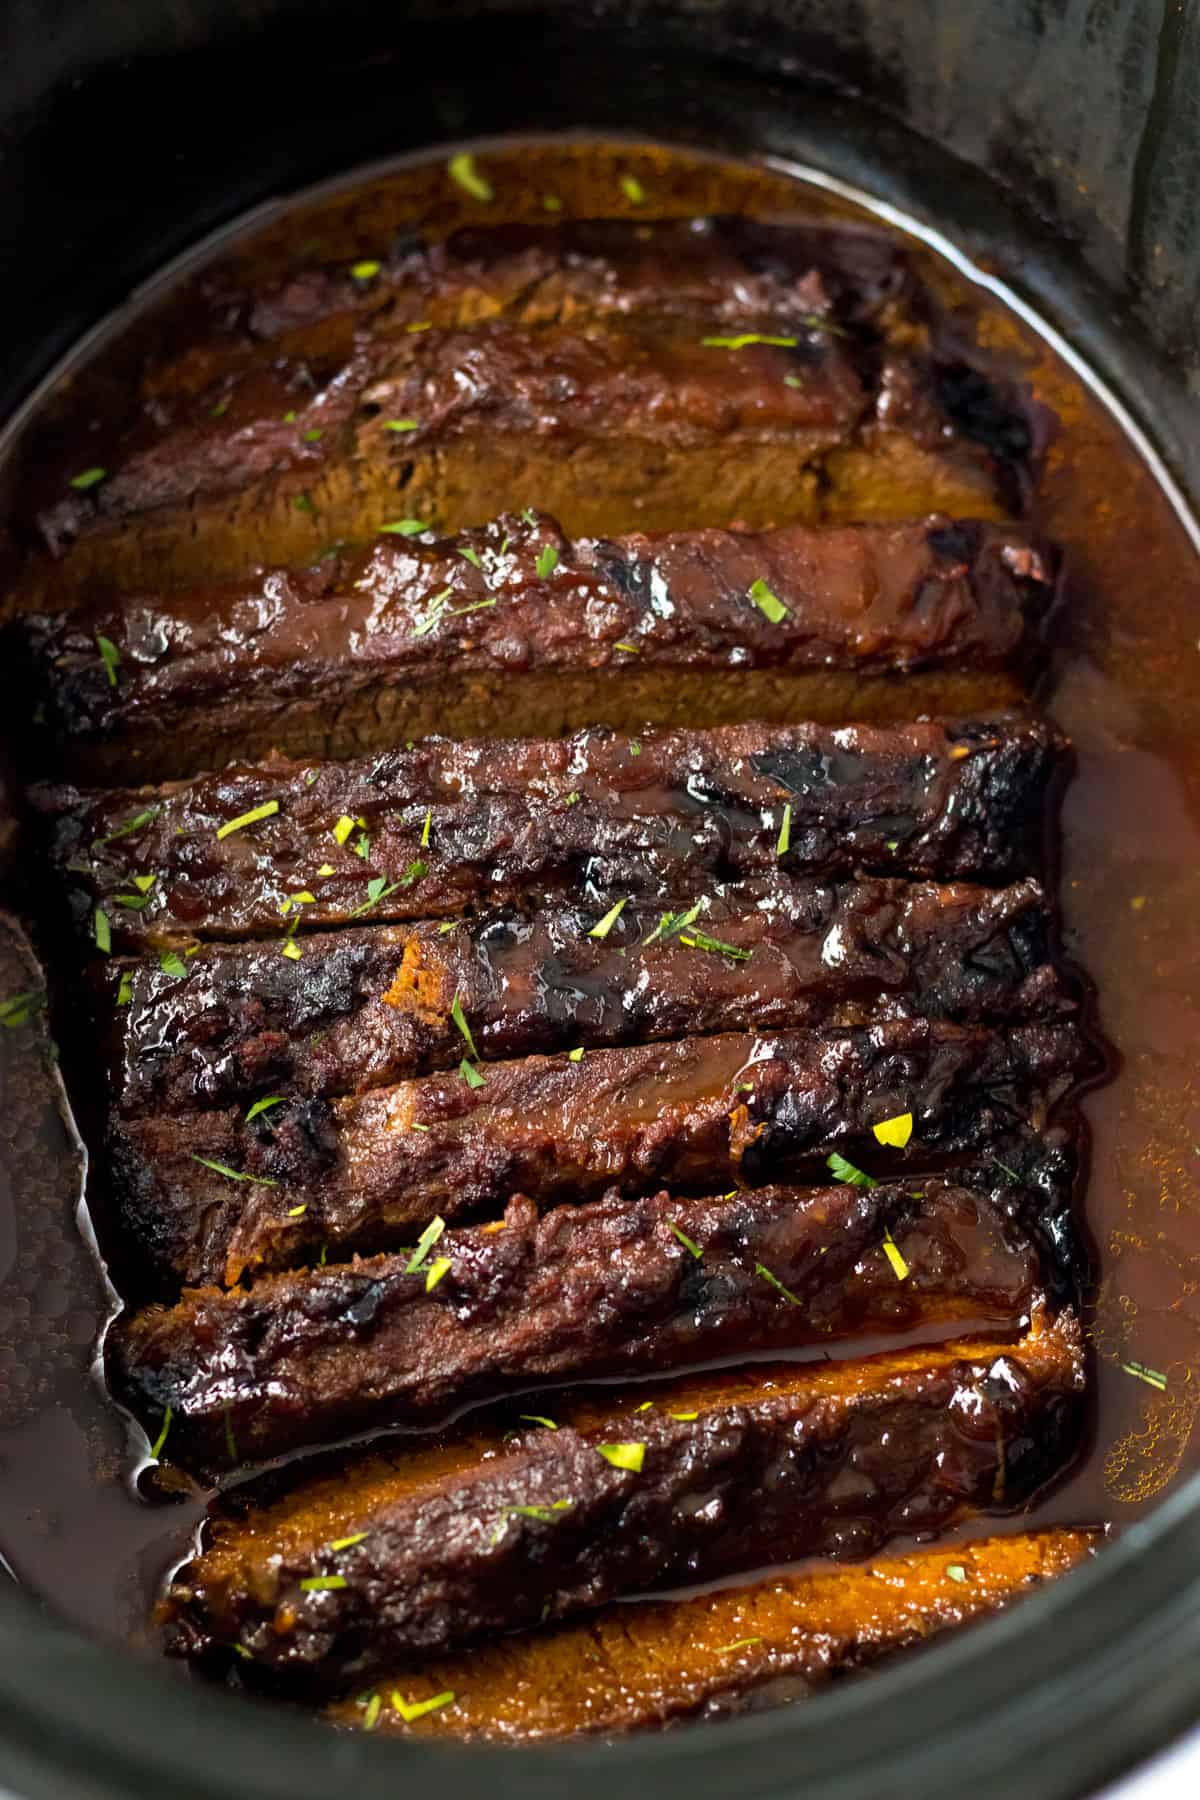 Slow cooker brisket with bbq sauce and seasonings.